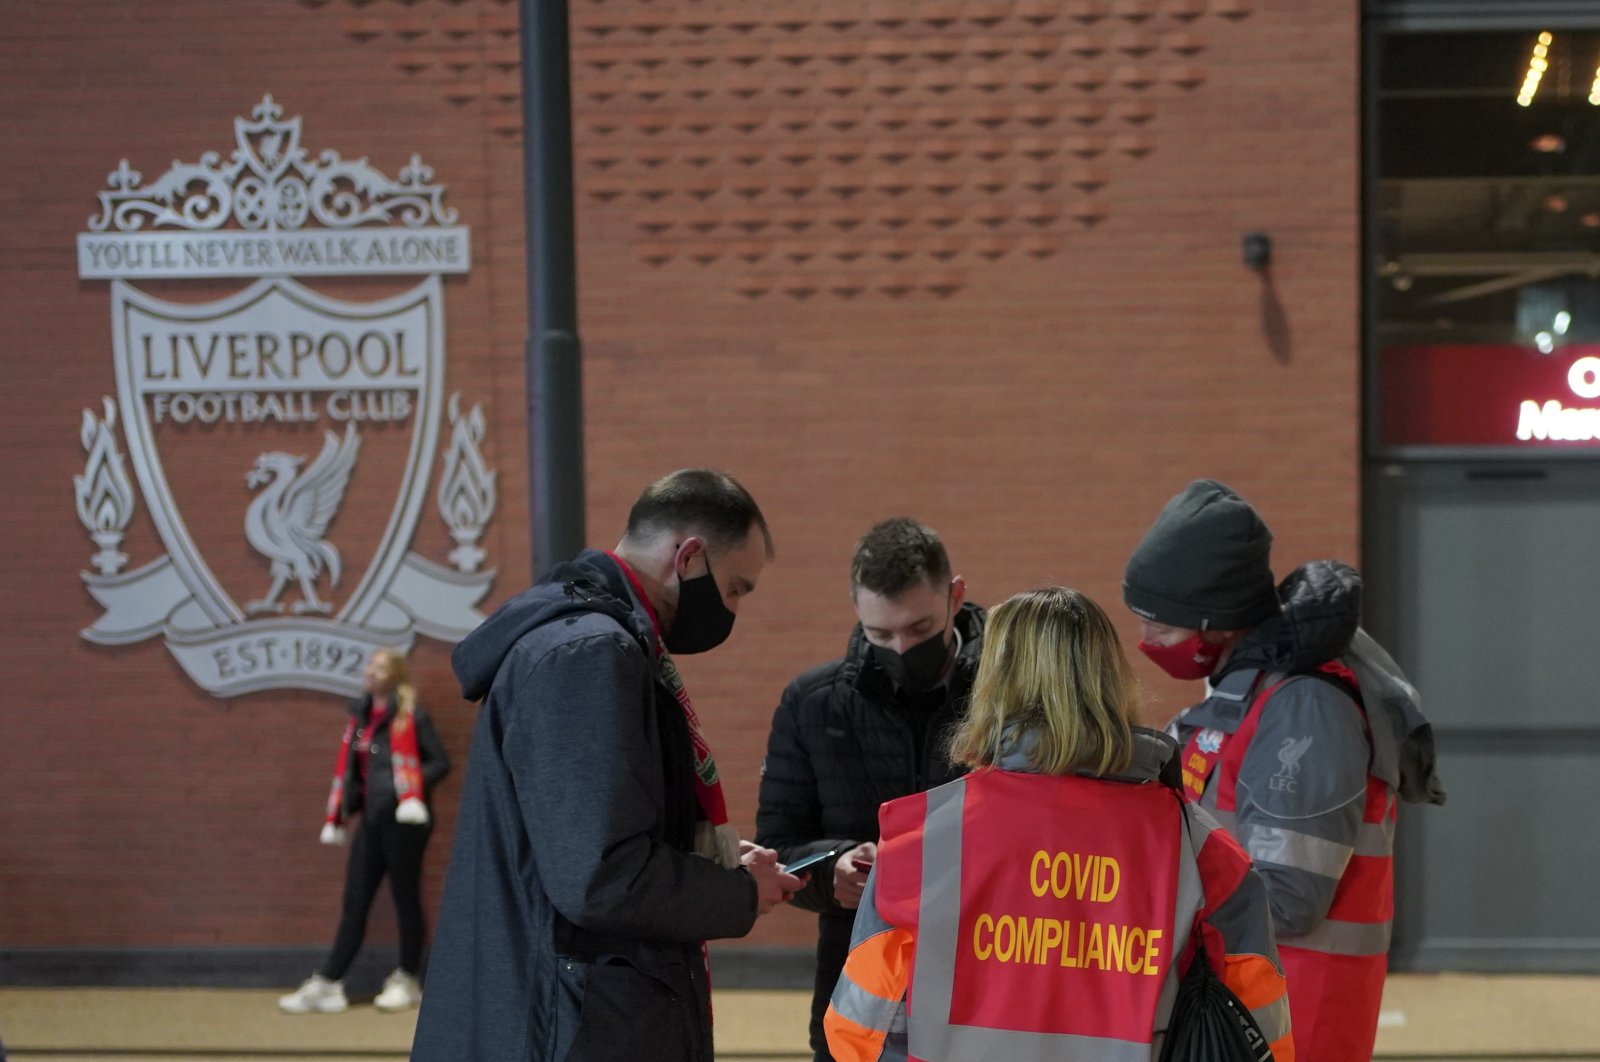 Stewards check the fans for COVID-19 documents at the entrance of Anfield stadium before a Premier League match against Newcastle United, Liverpool, England, Dec. 16, 2021. (AP Photo)